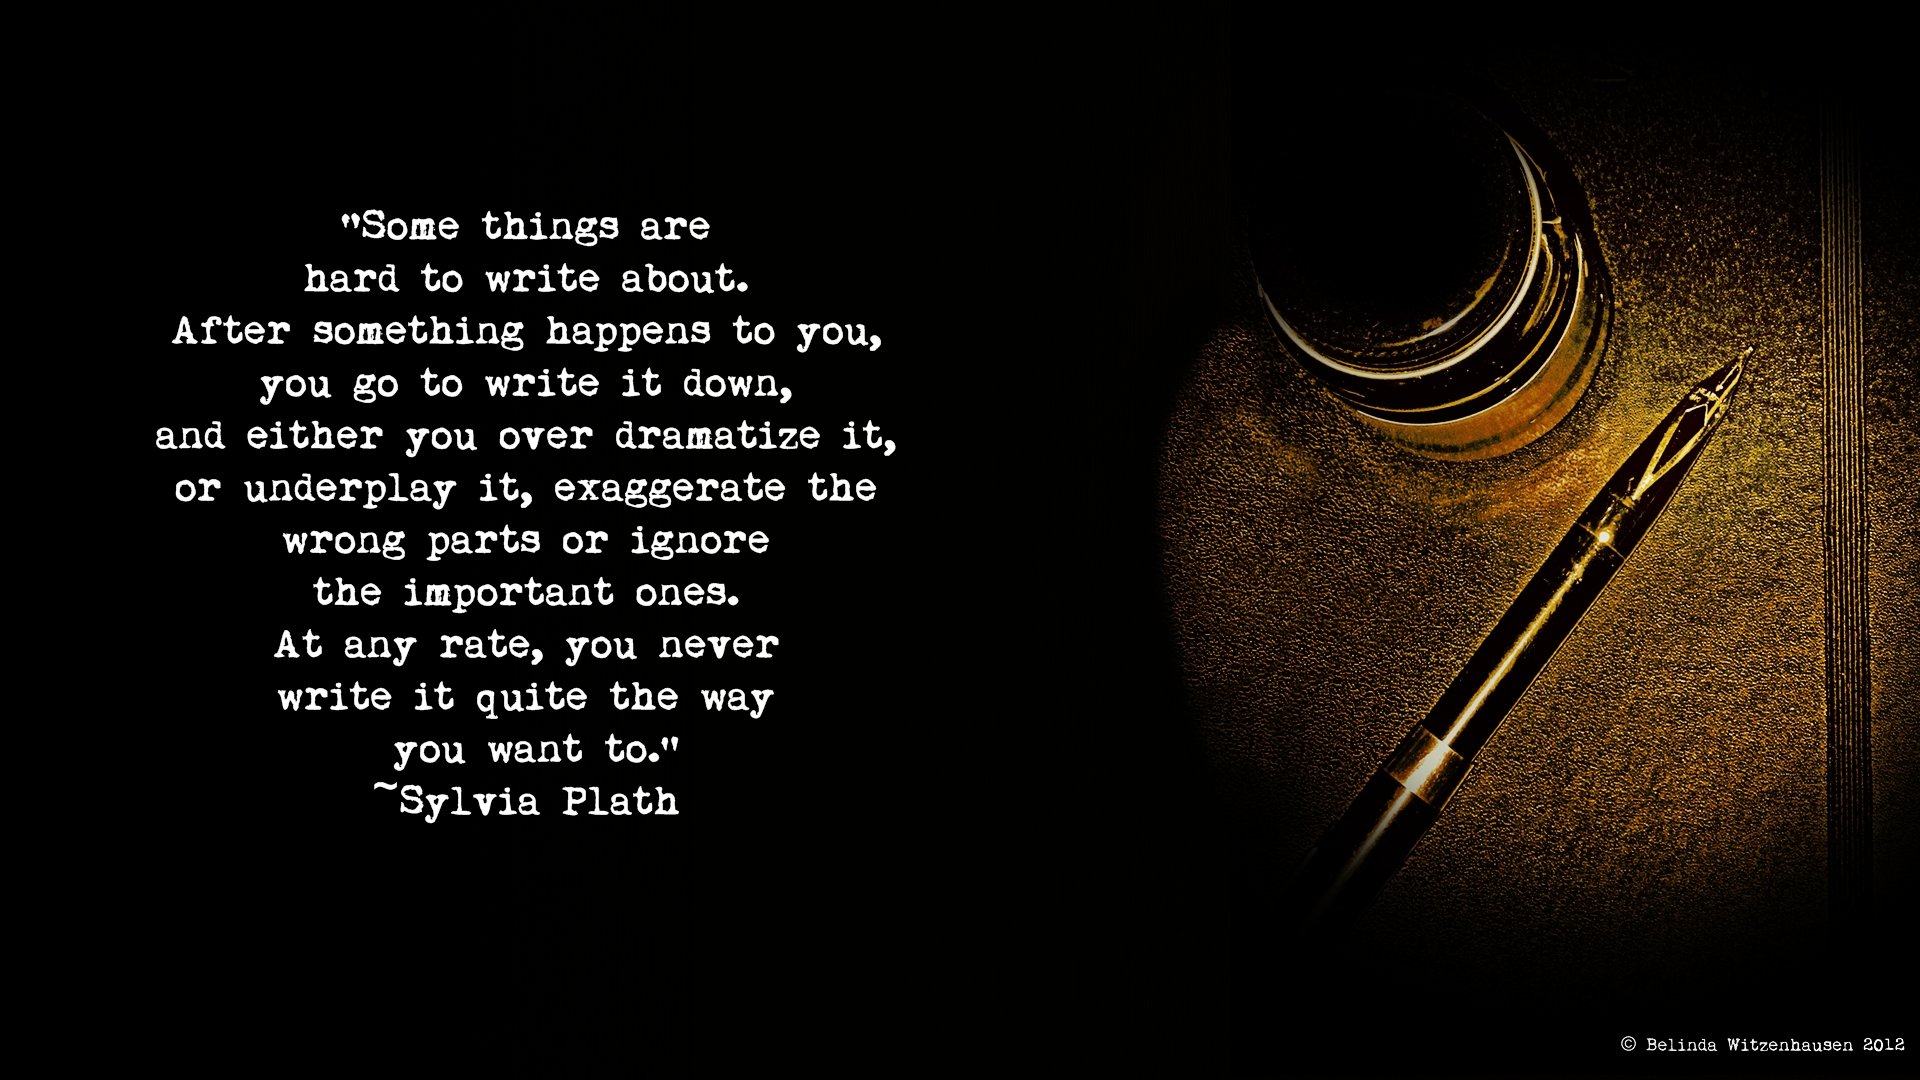 Quotes from Sylvia Plath